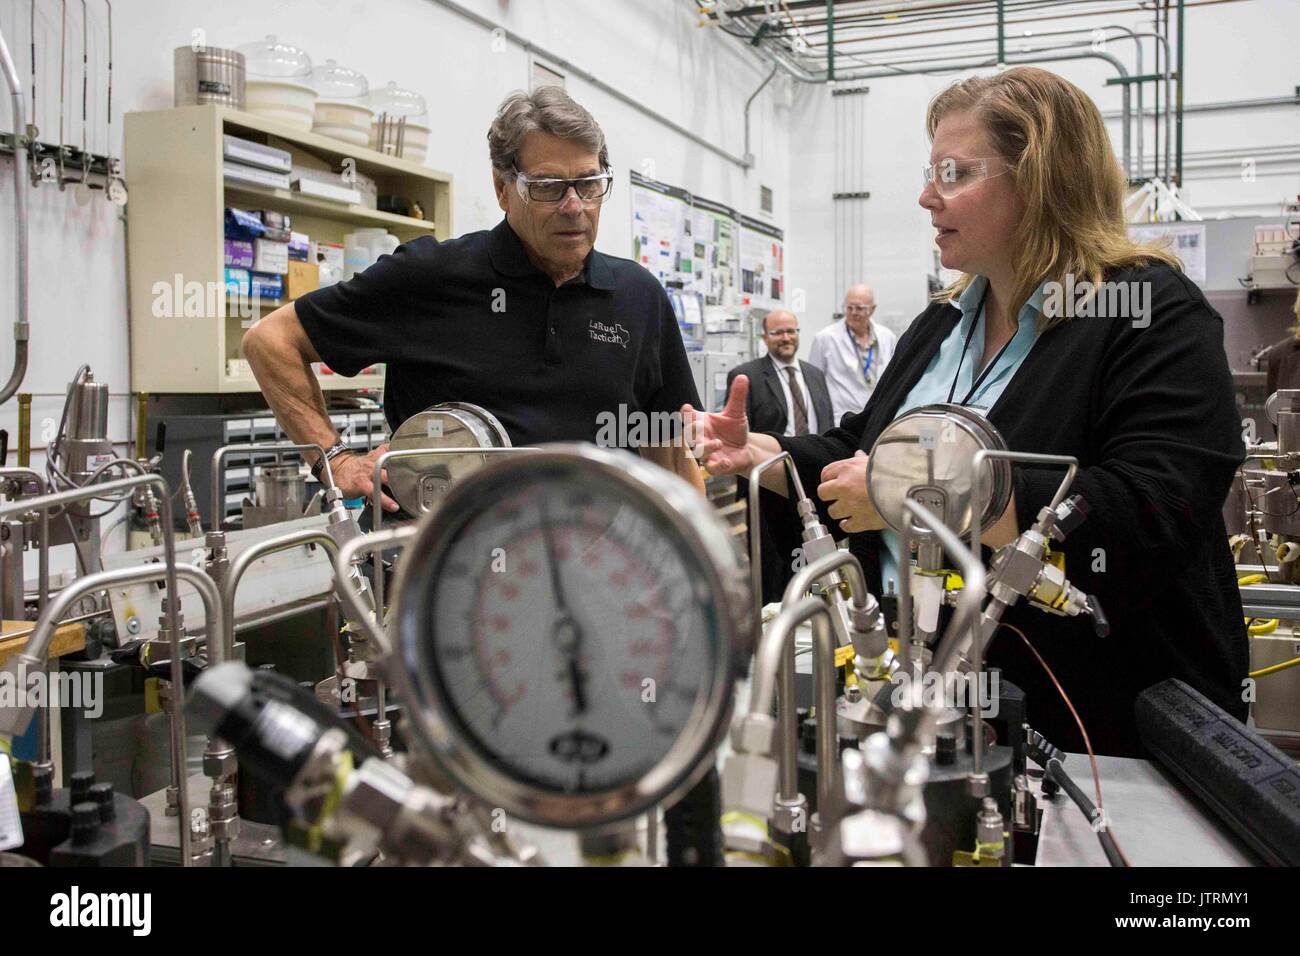 U.S. Secretary of Energy Rick Perry, during a tour of the National Energy Technology Laboratory July 6, 2017 in Pittsburgh, Pennsylvania. Stock Photo